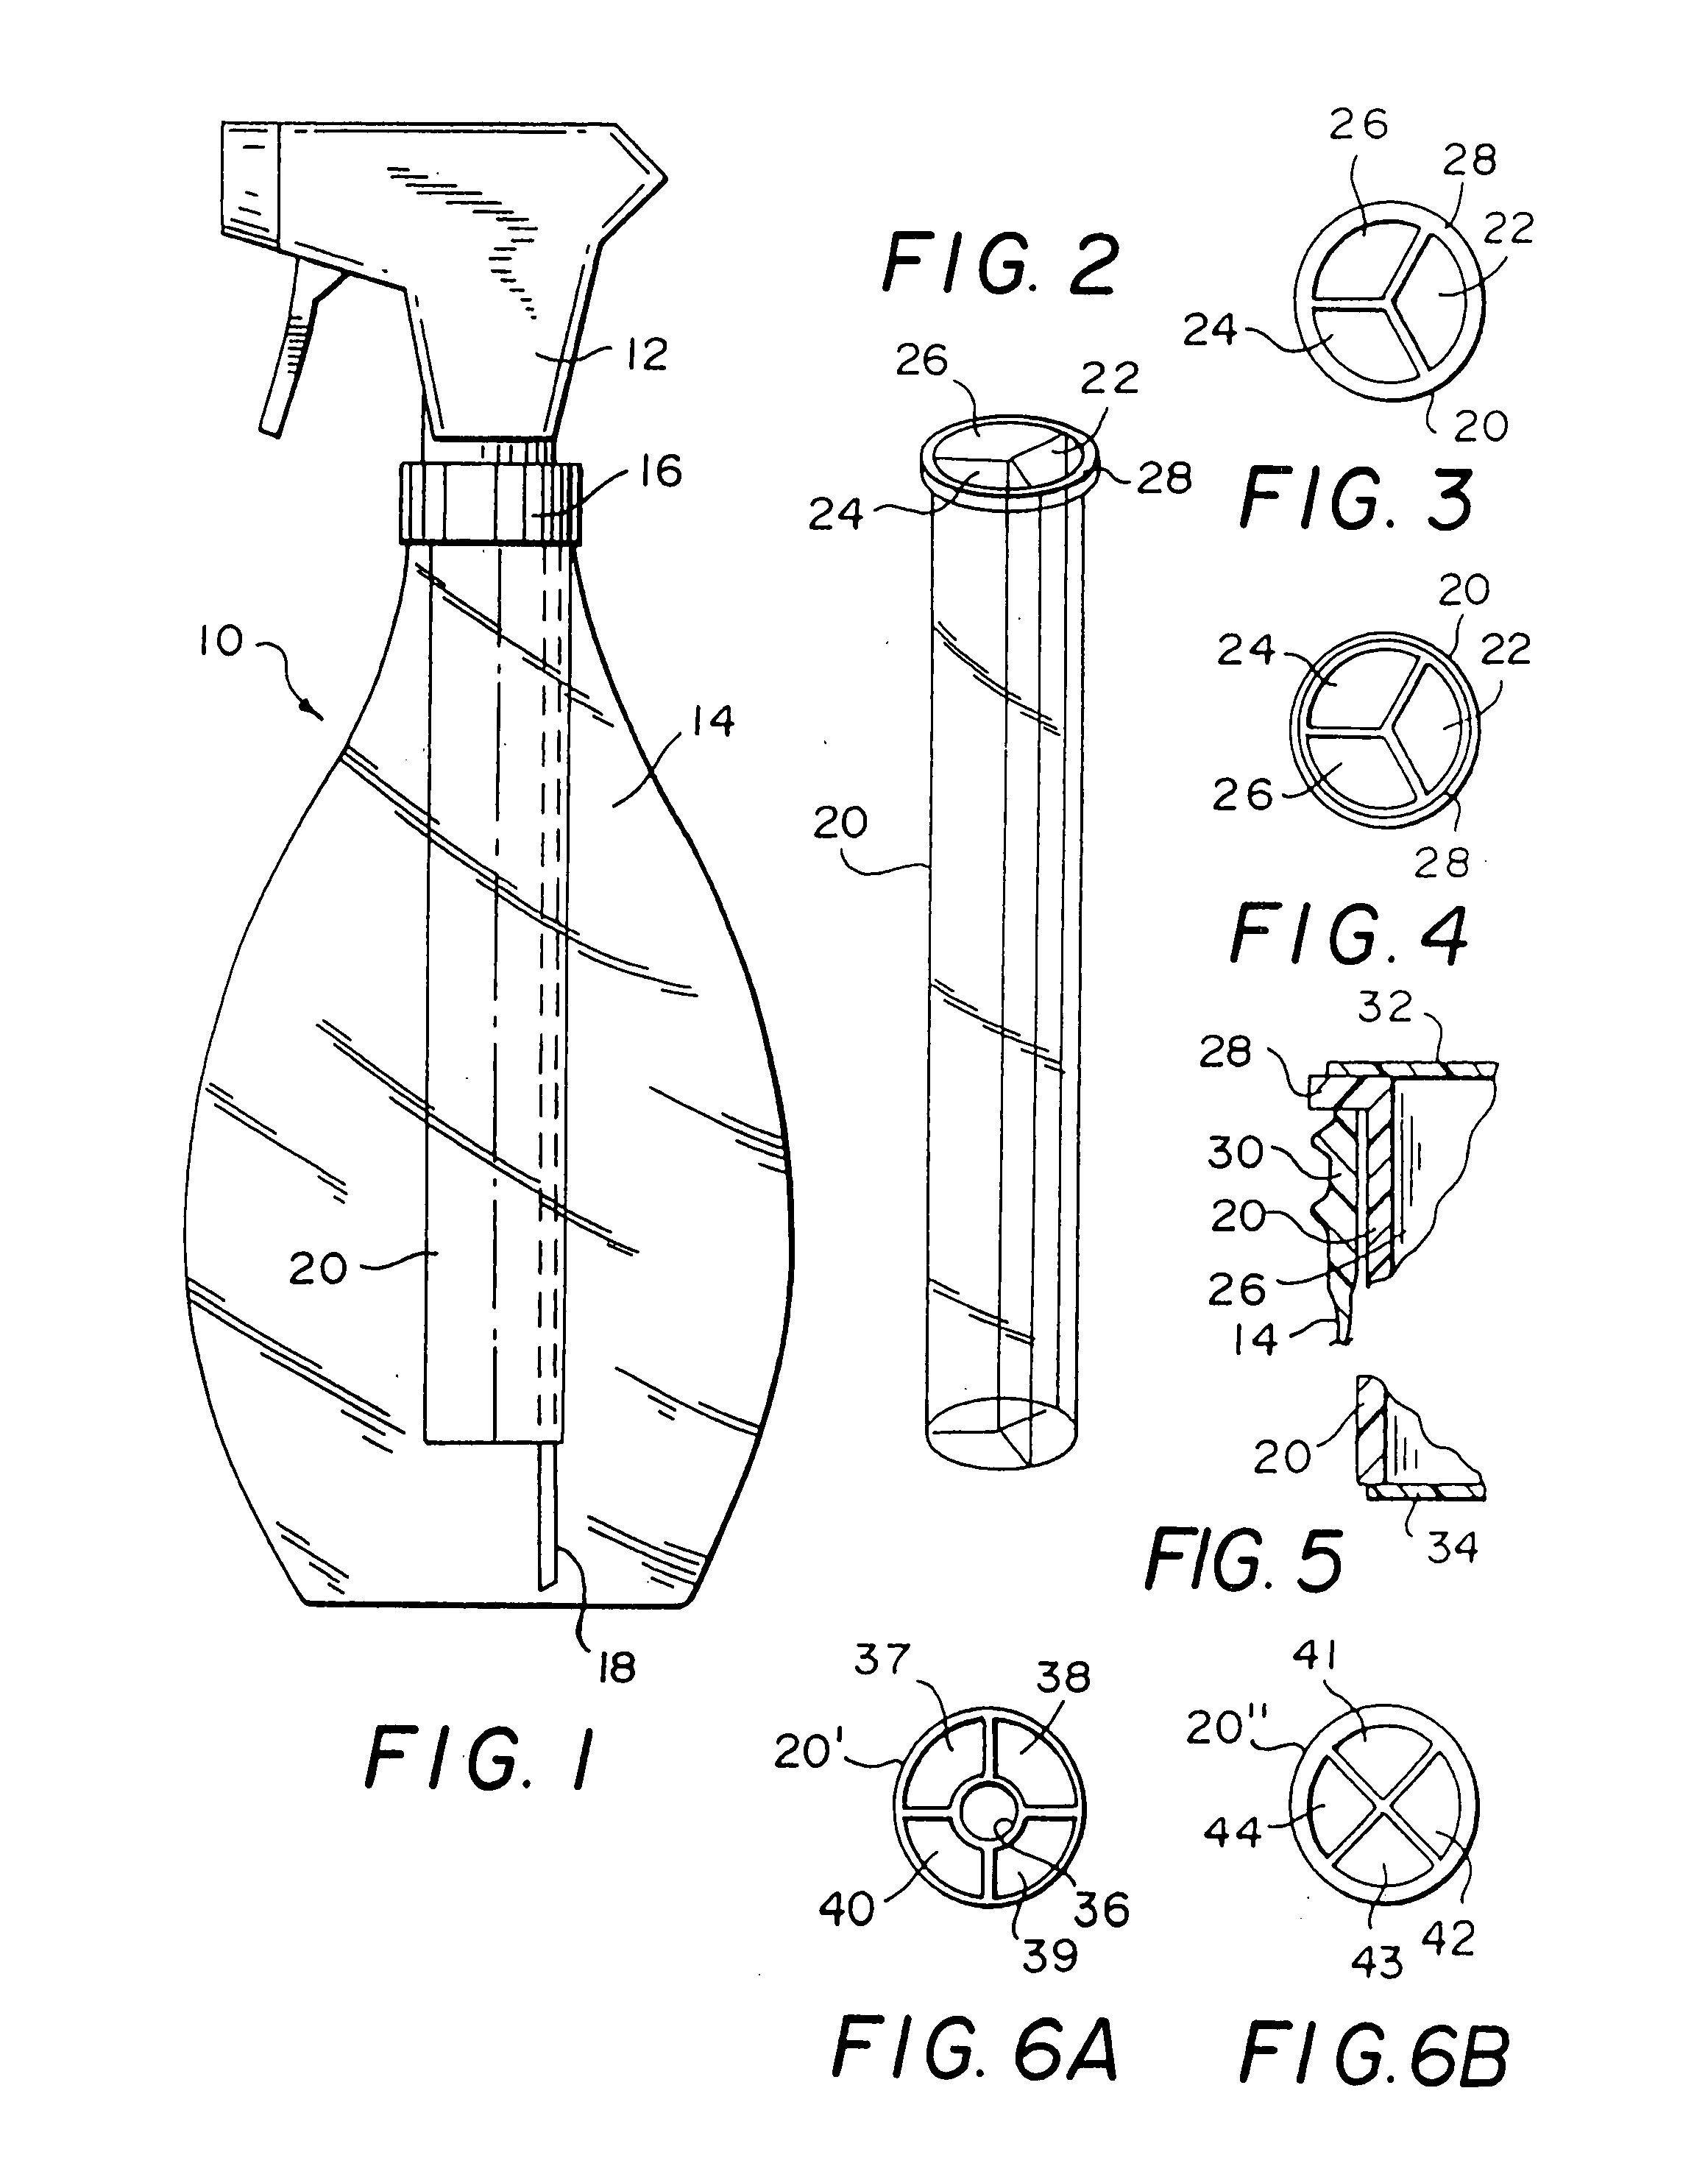 Dispensing devices, and systems